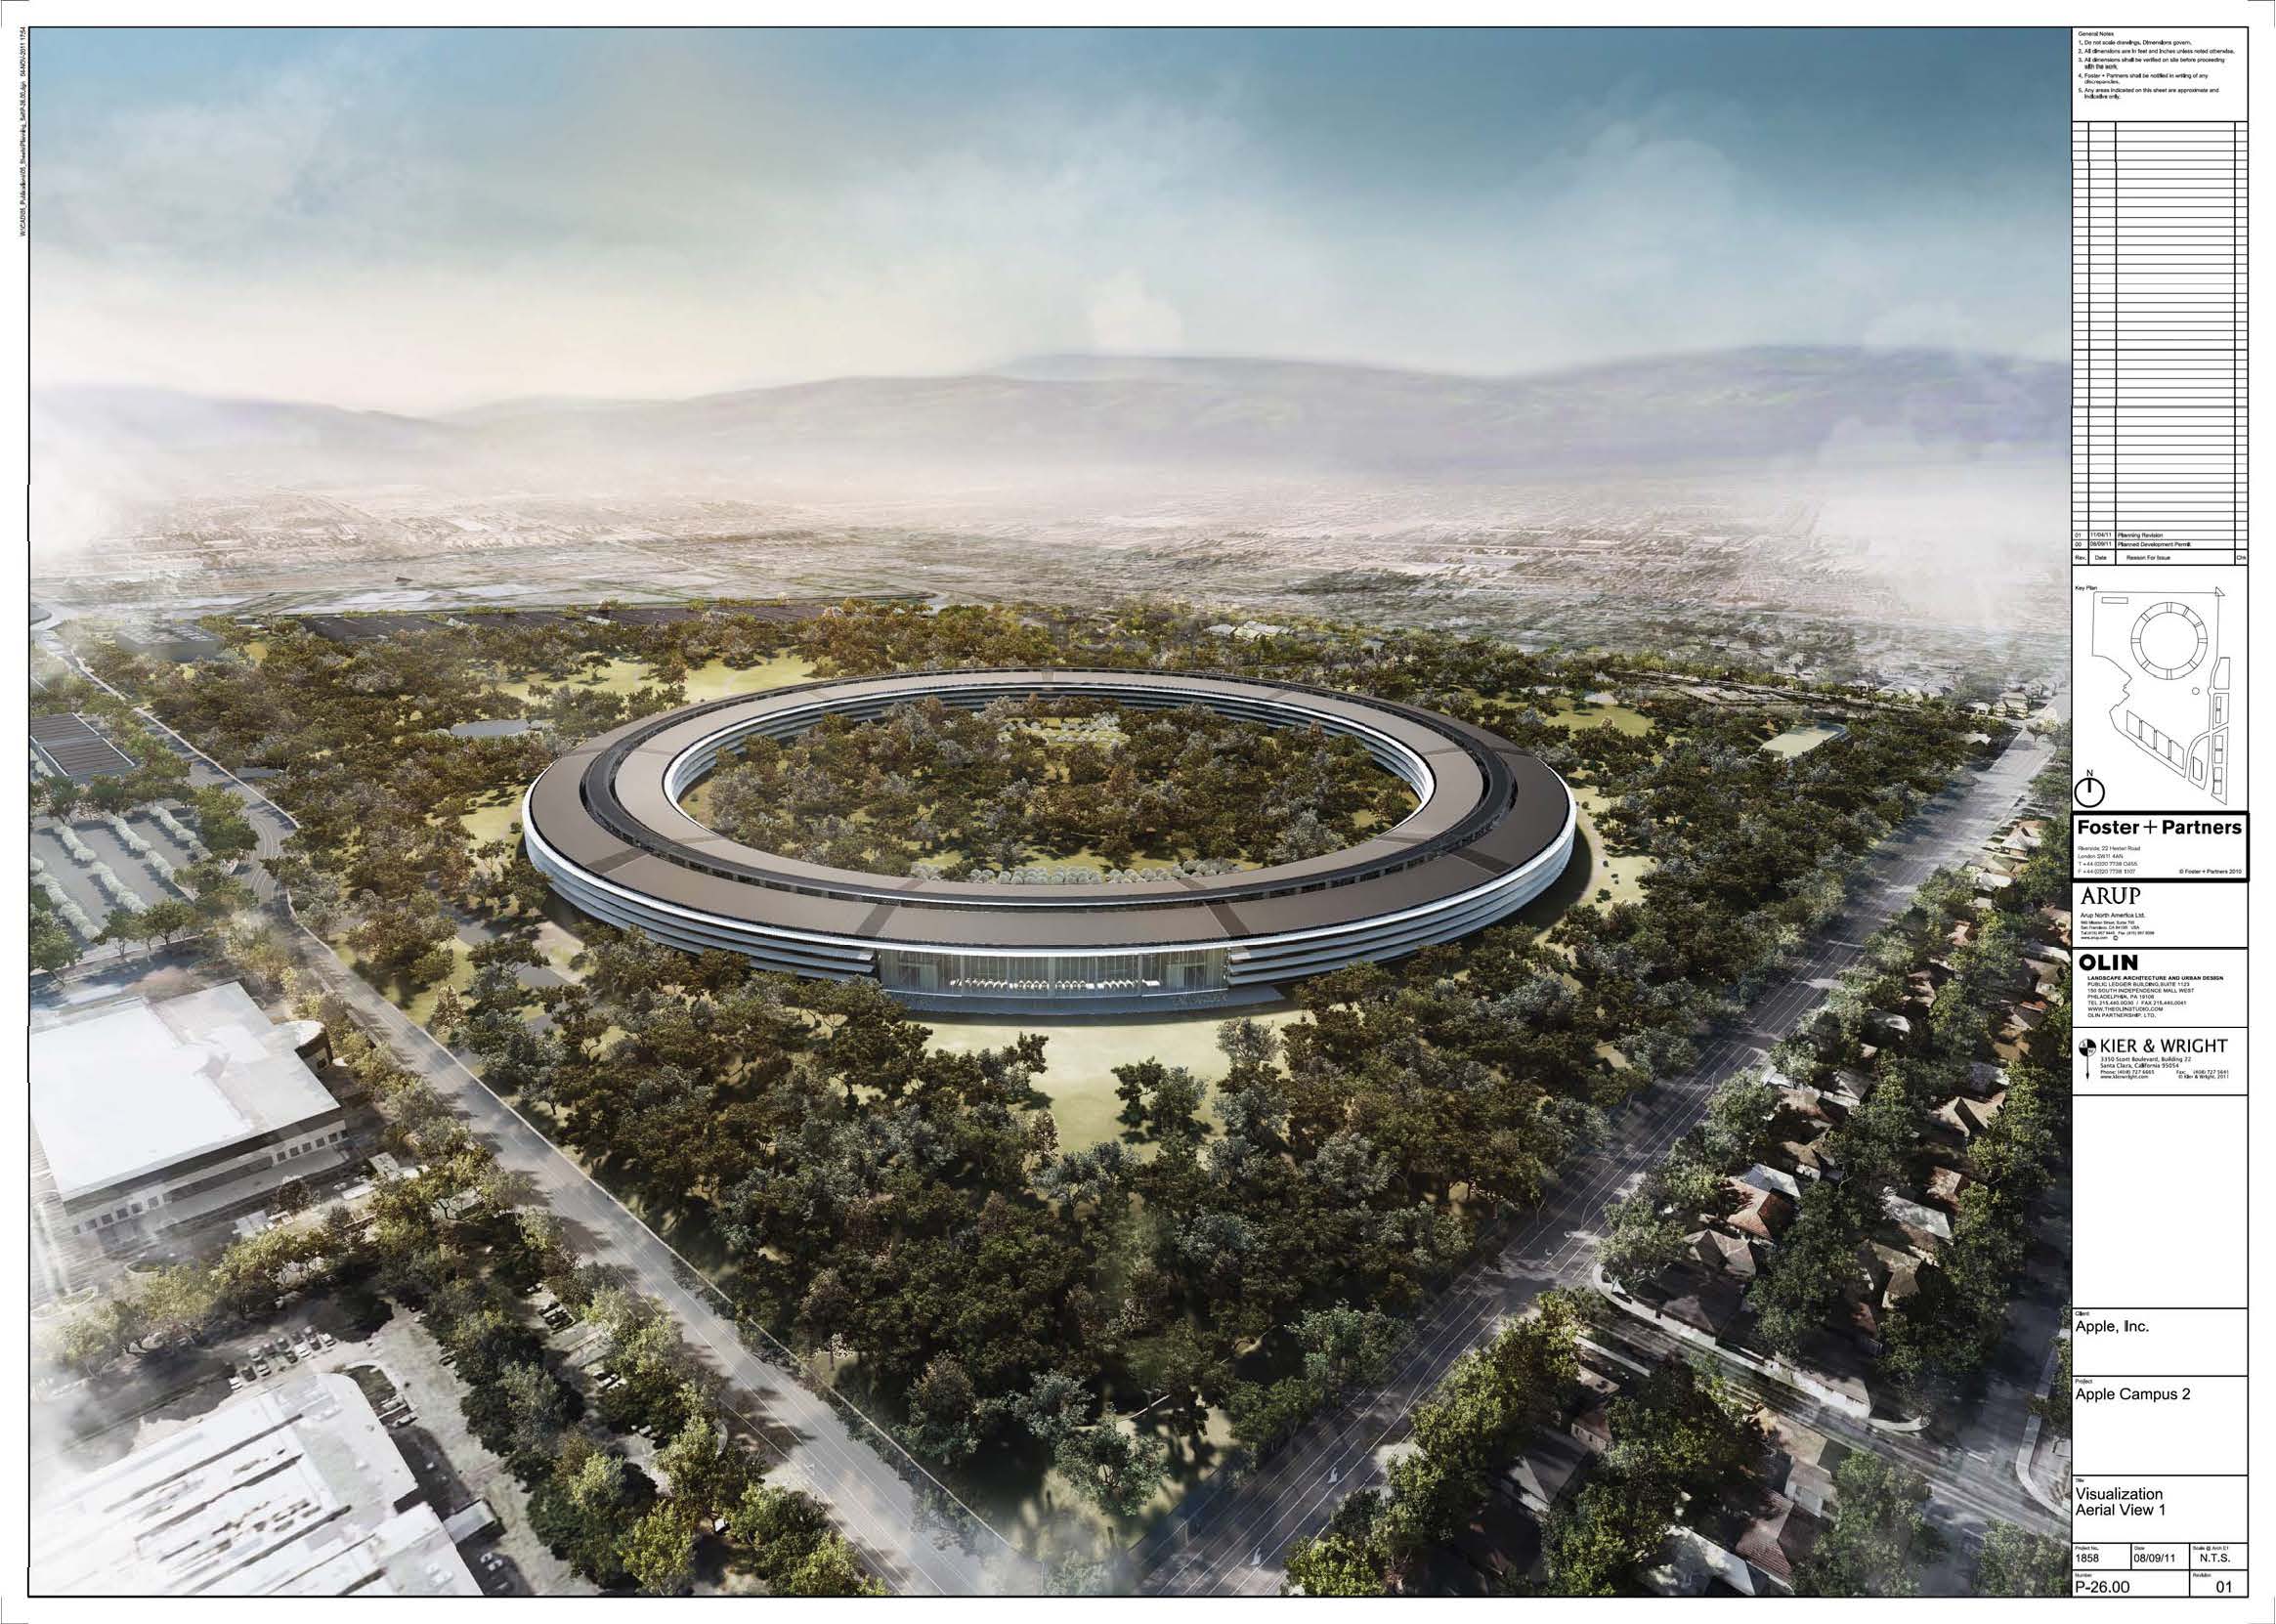 Apple Campus 2 - Foster + Partners - US